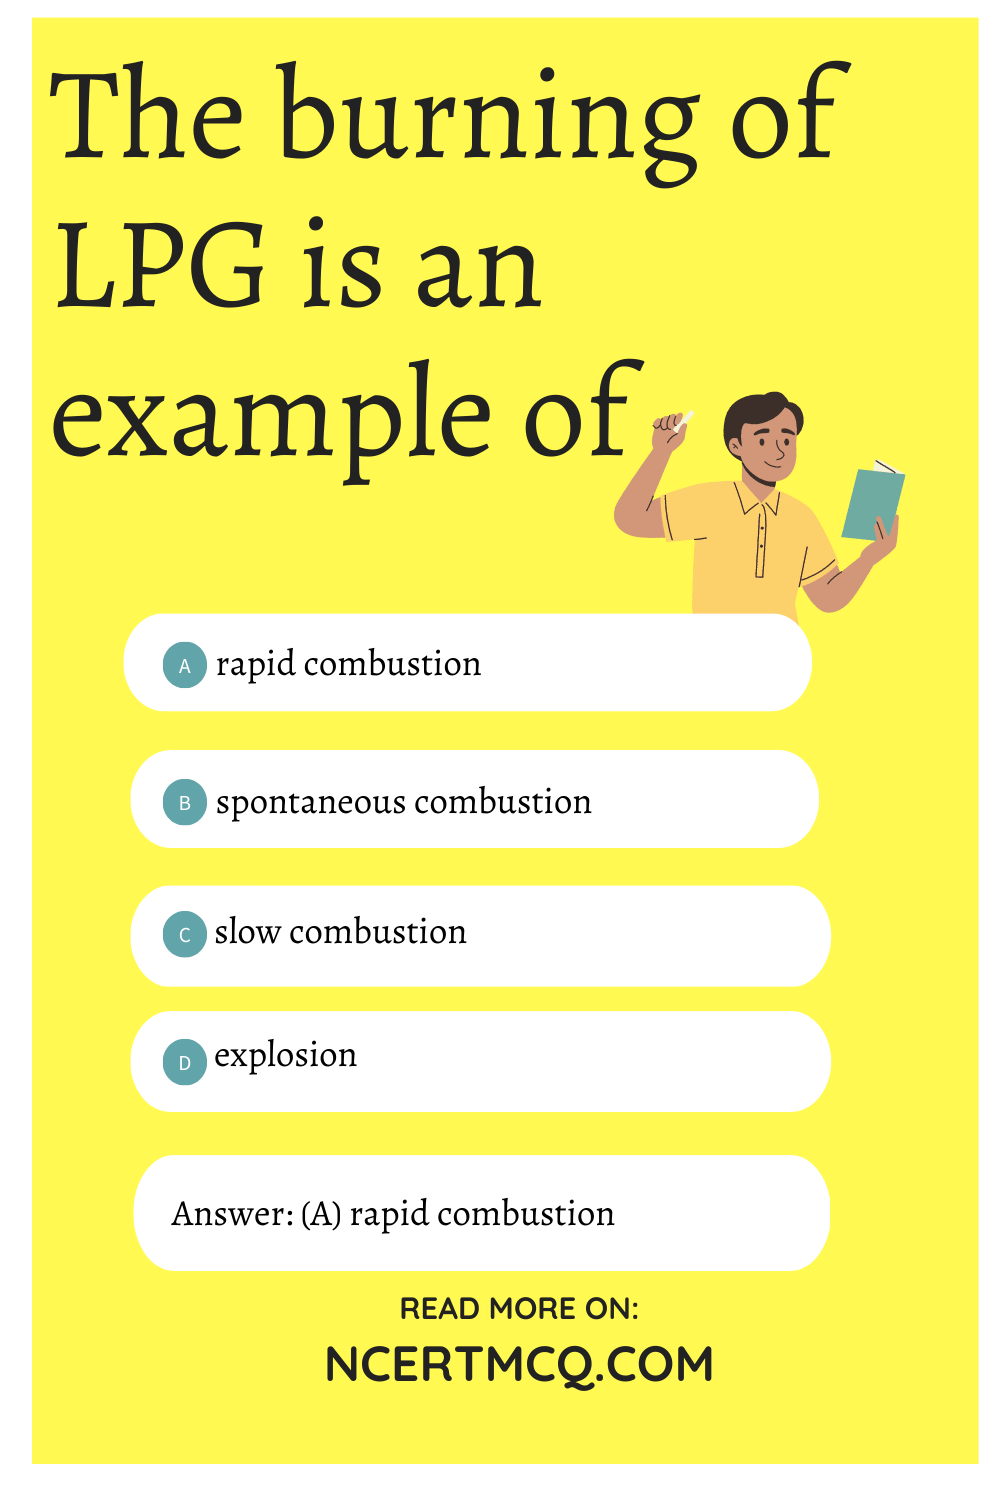 The burning of LPG is an example of